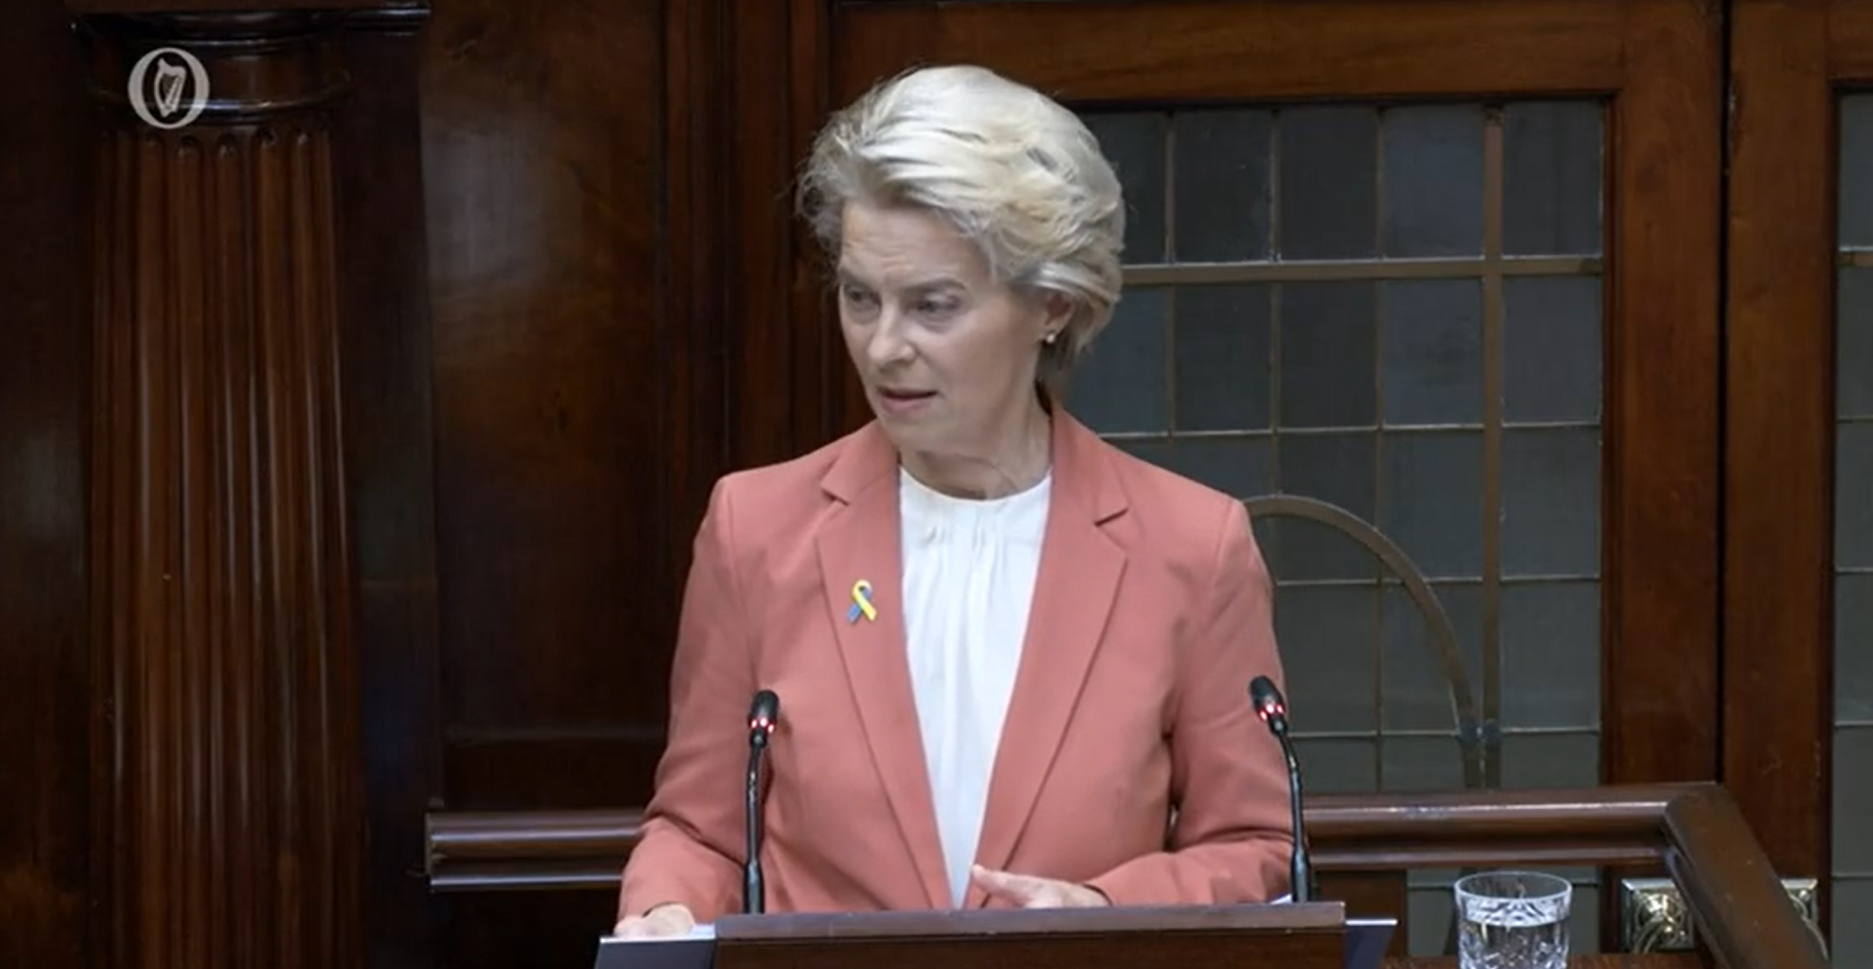 European Commission President Ursula von der Leyen addresses the Joint Houses of the Oireachtas in the Dáil chamber